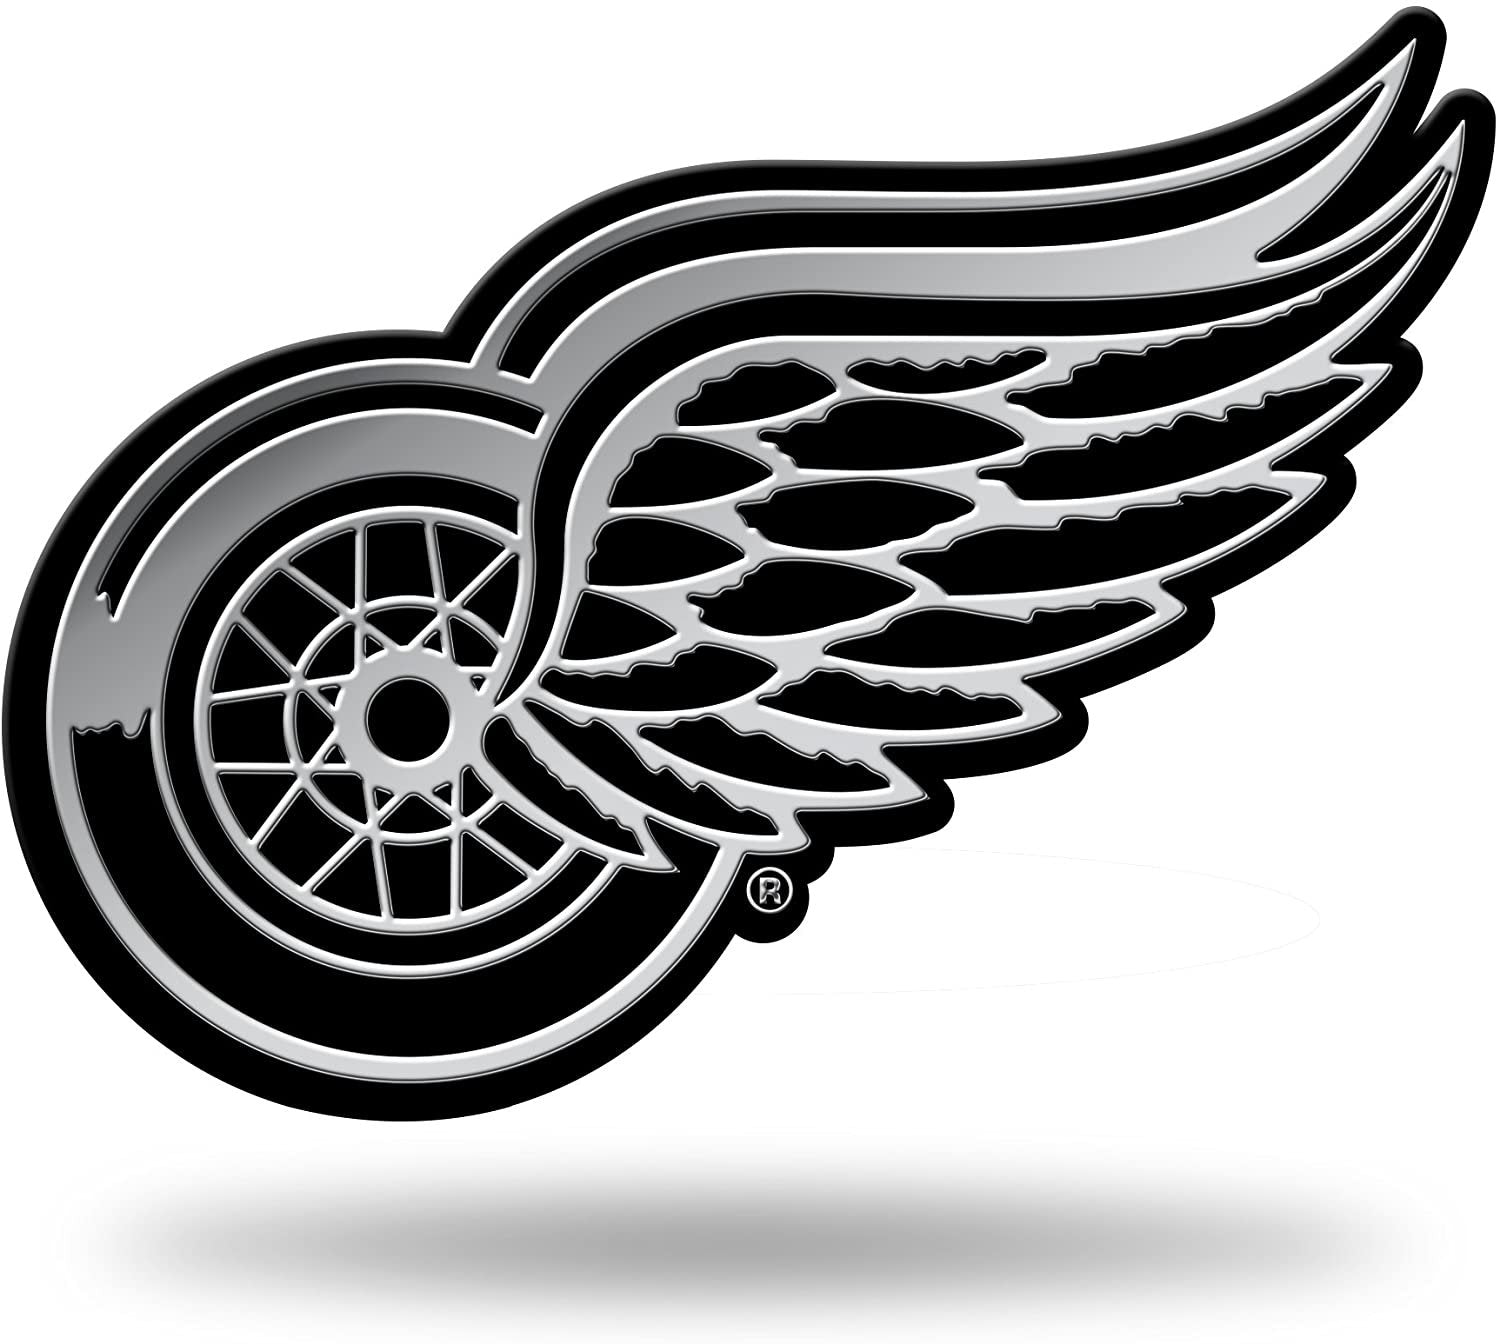 Detroit Red Wings Auto Emblem, Silver Chrome Color, Raised Molded Plastic, 3.5 Inch, Adhesive Tape Backing